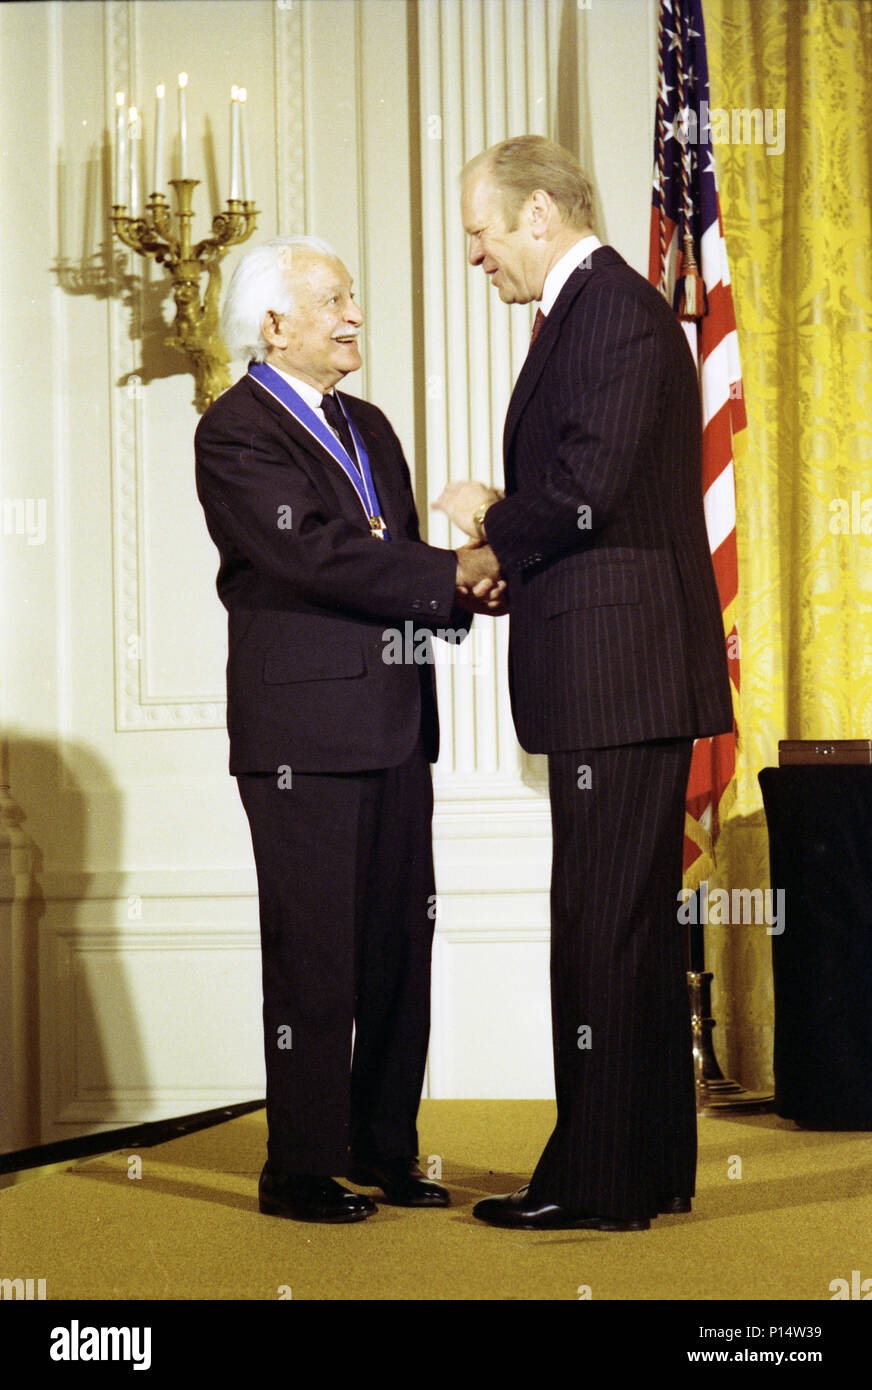 1977, January 10 – East Room – The White House –  Gerald R. Ford, Arthur Fiedler – on stage, handshaking, talking; Fiedler wearing medal – Presidential Medal of Freedom Presentation Ceremony - Violinist, Conductor Stock Photo